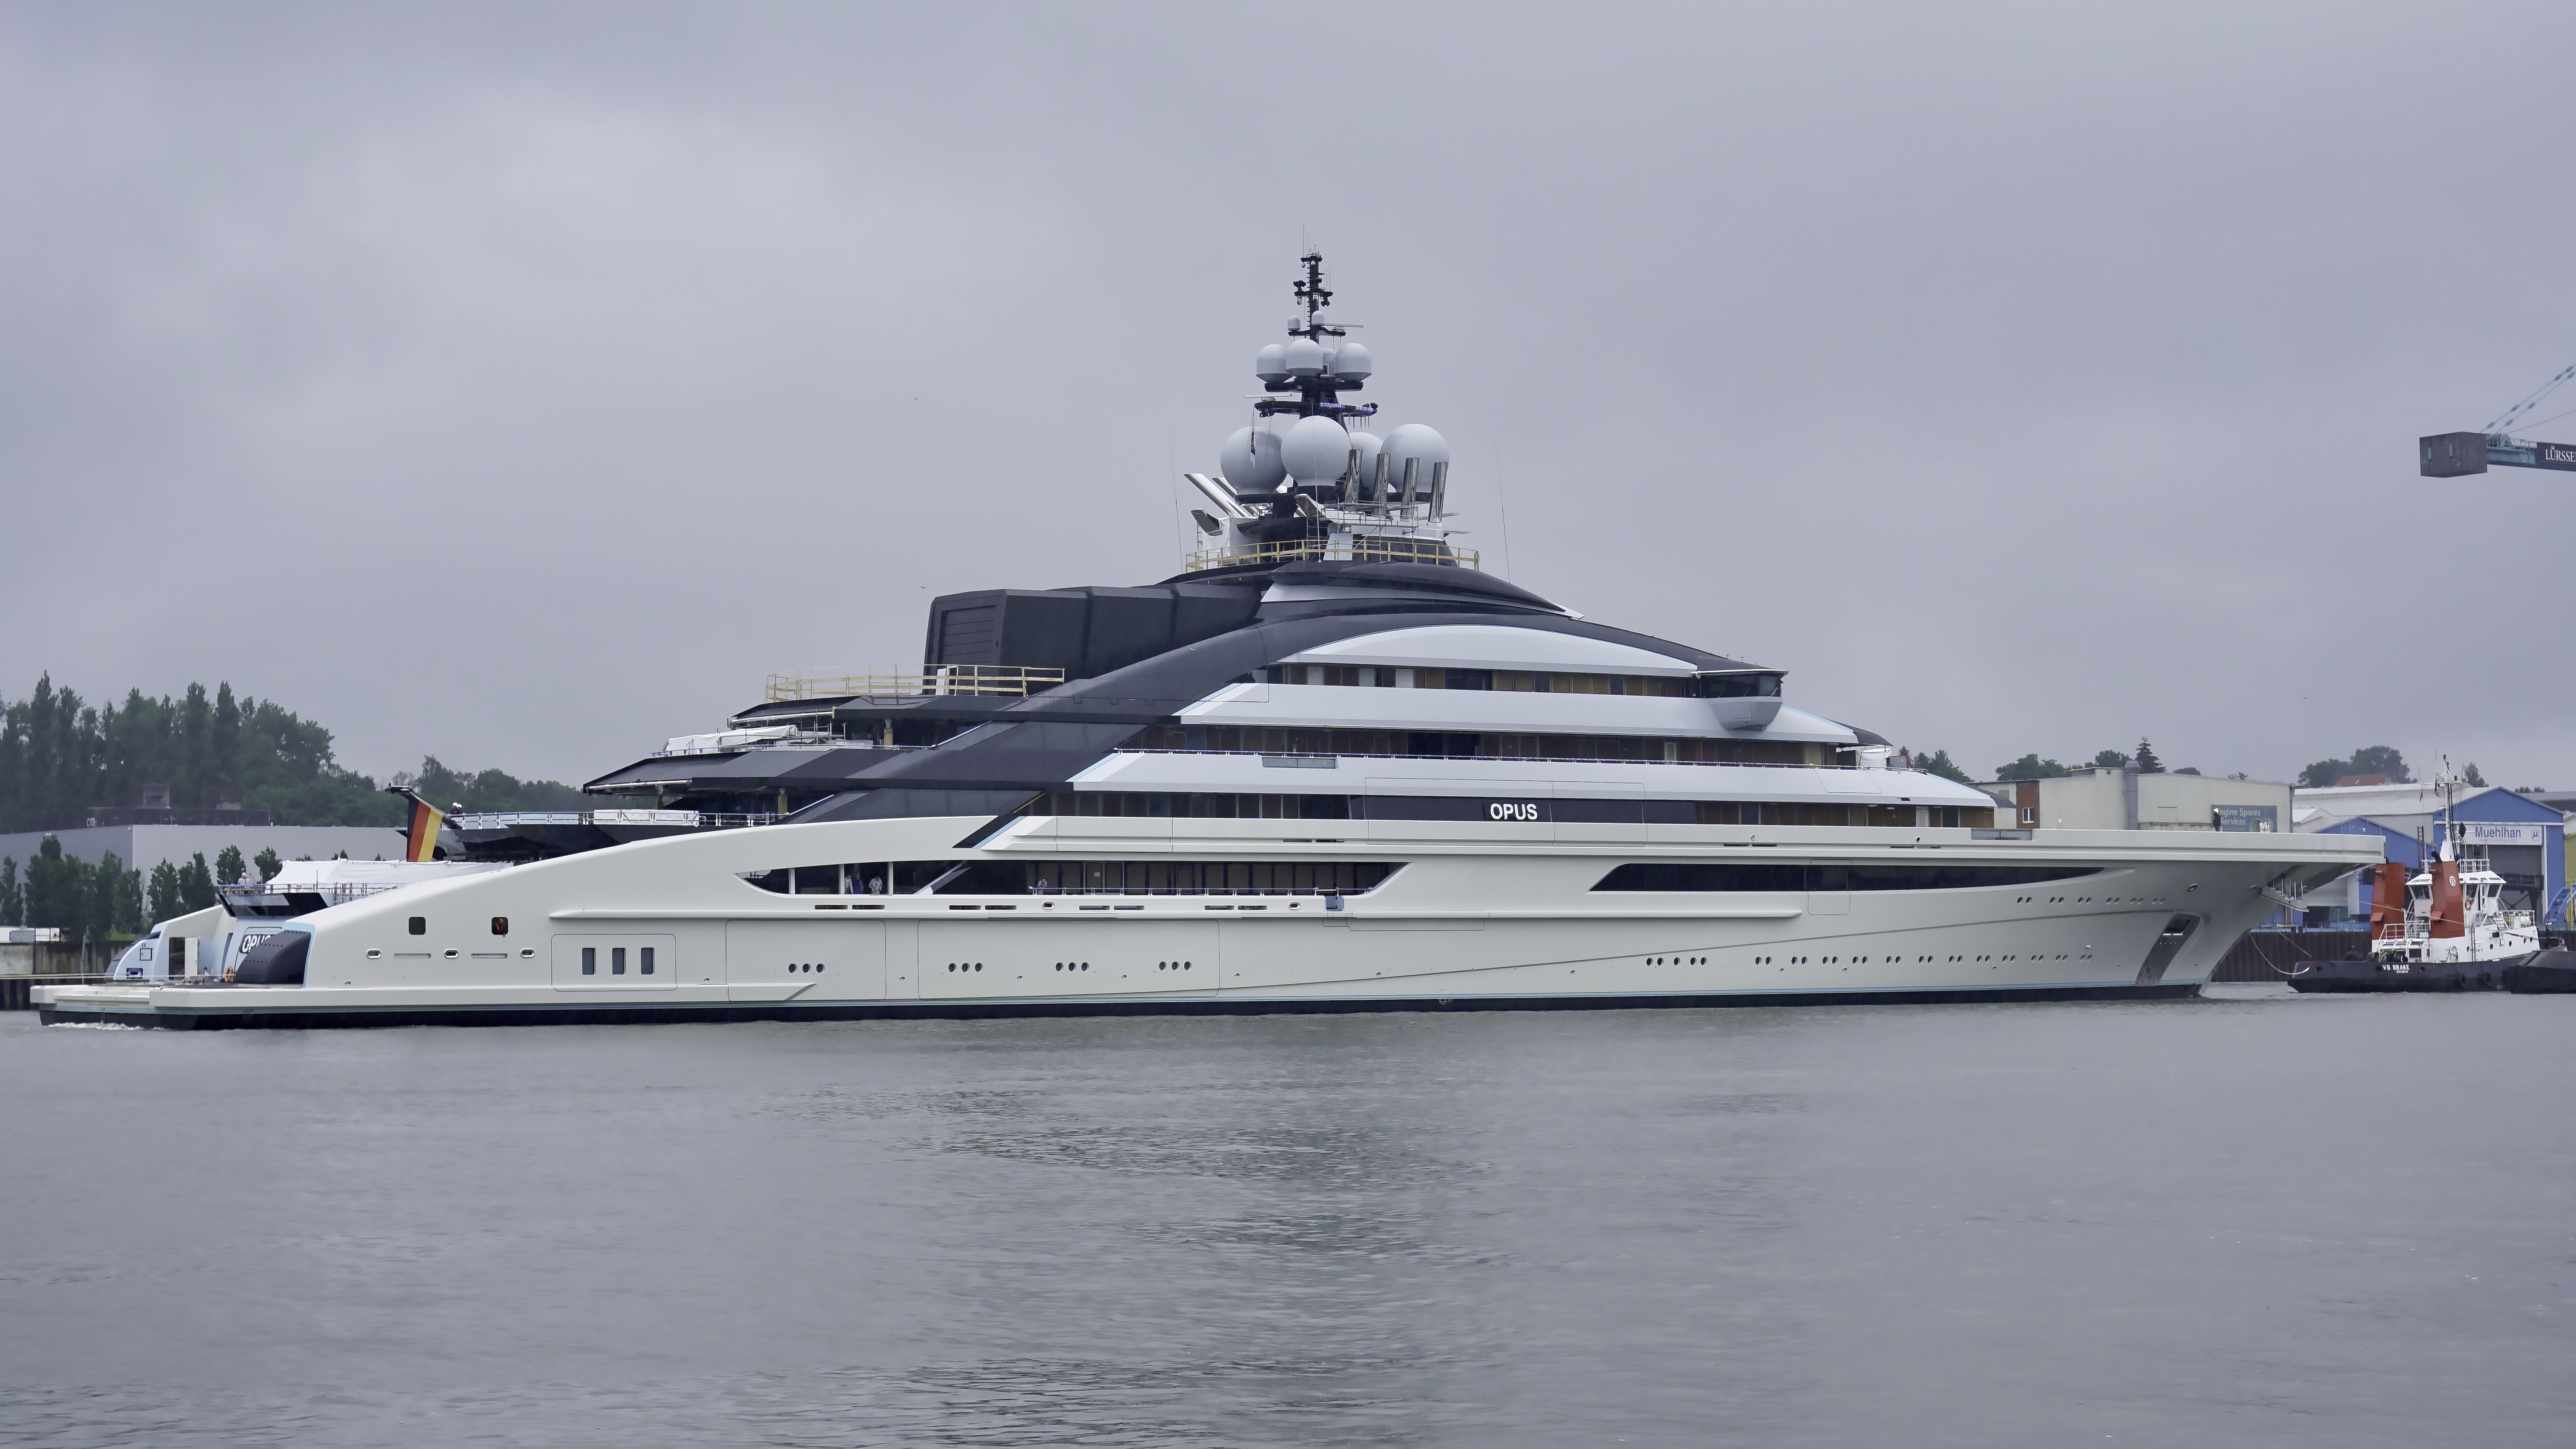 superyacht in opua today